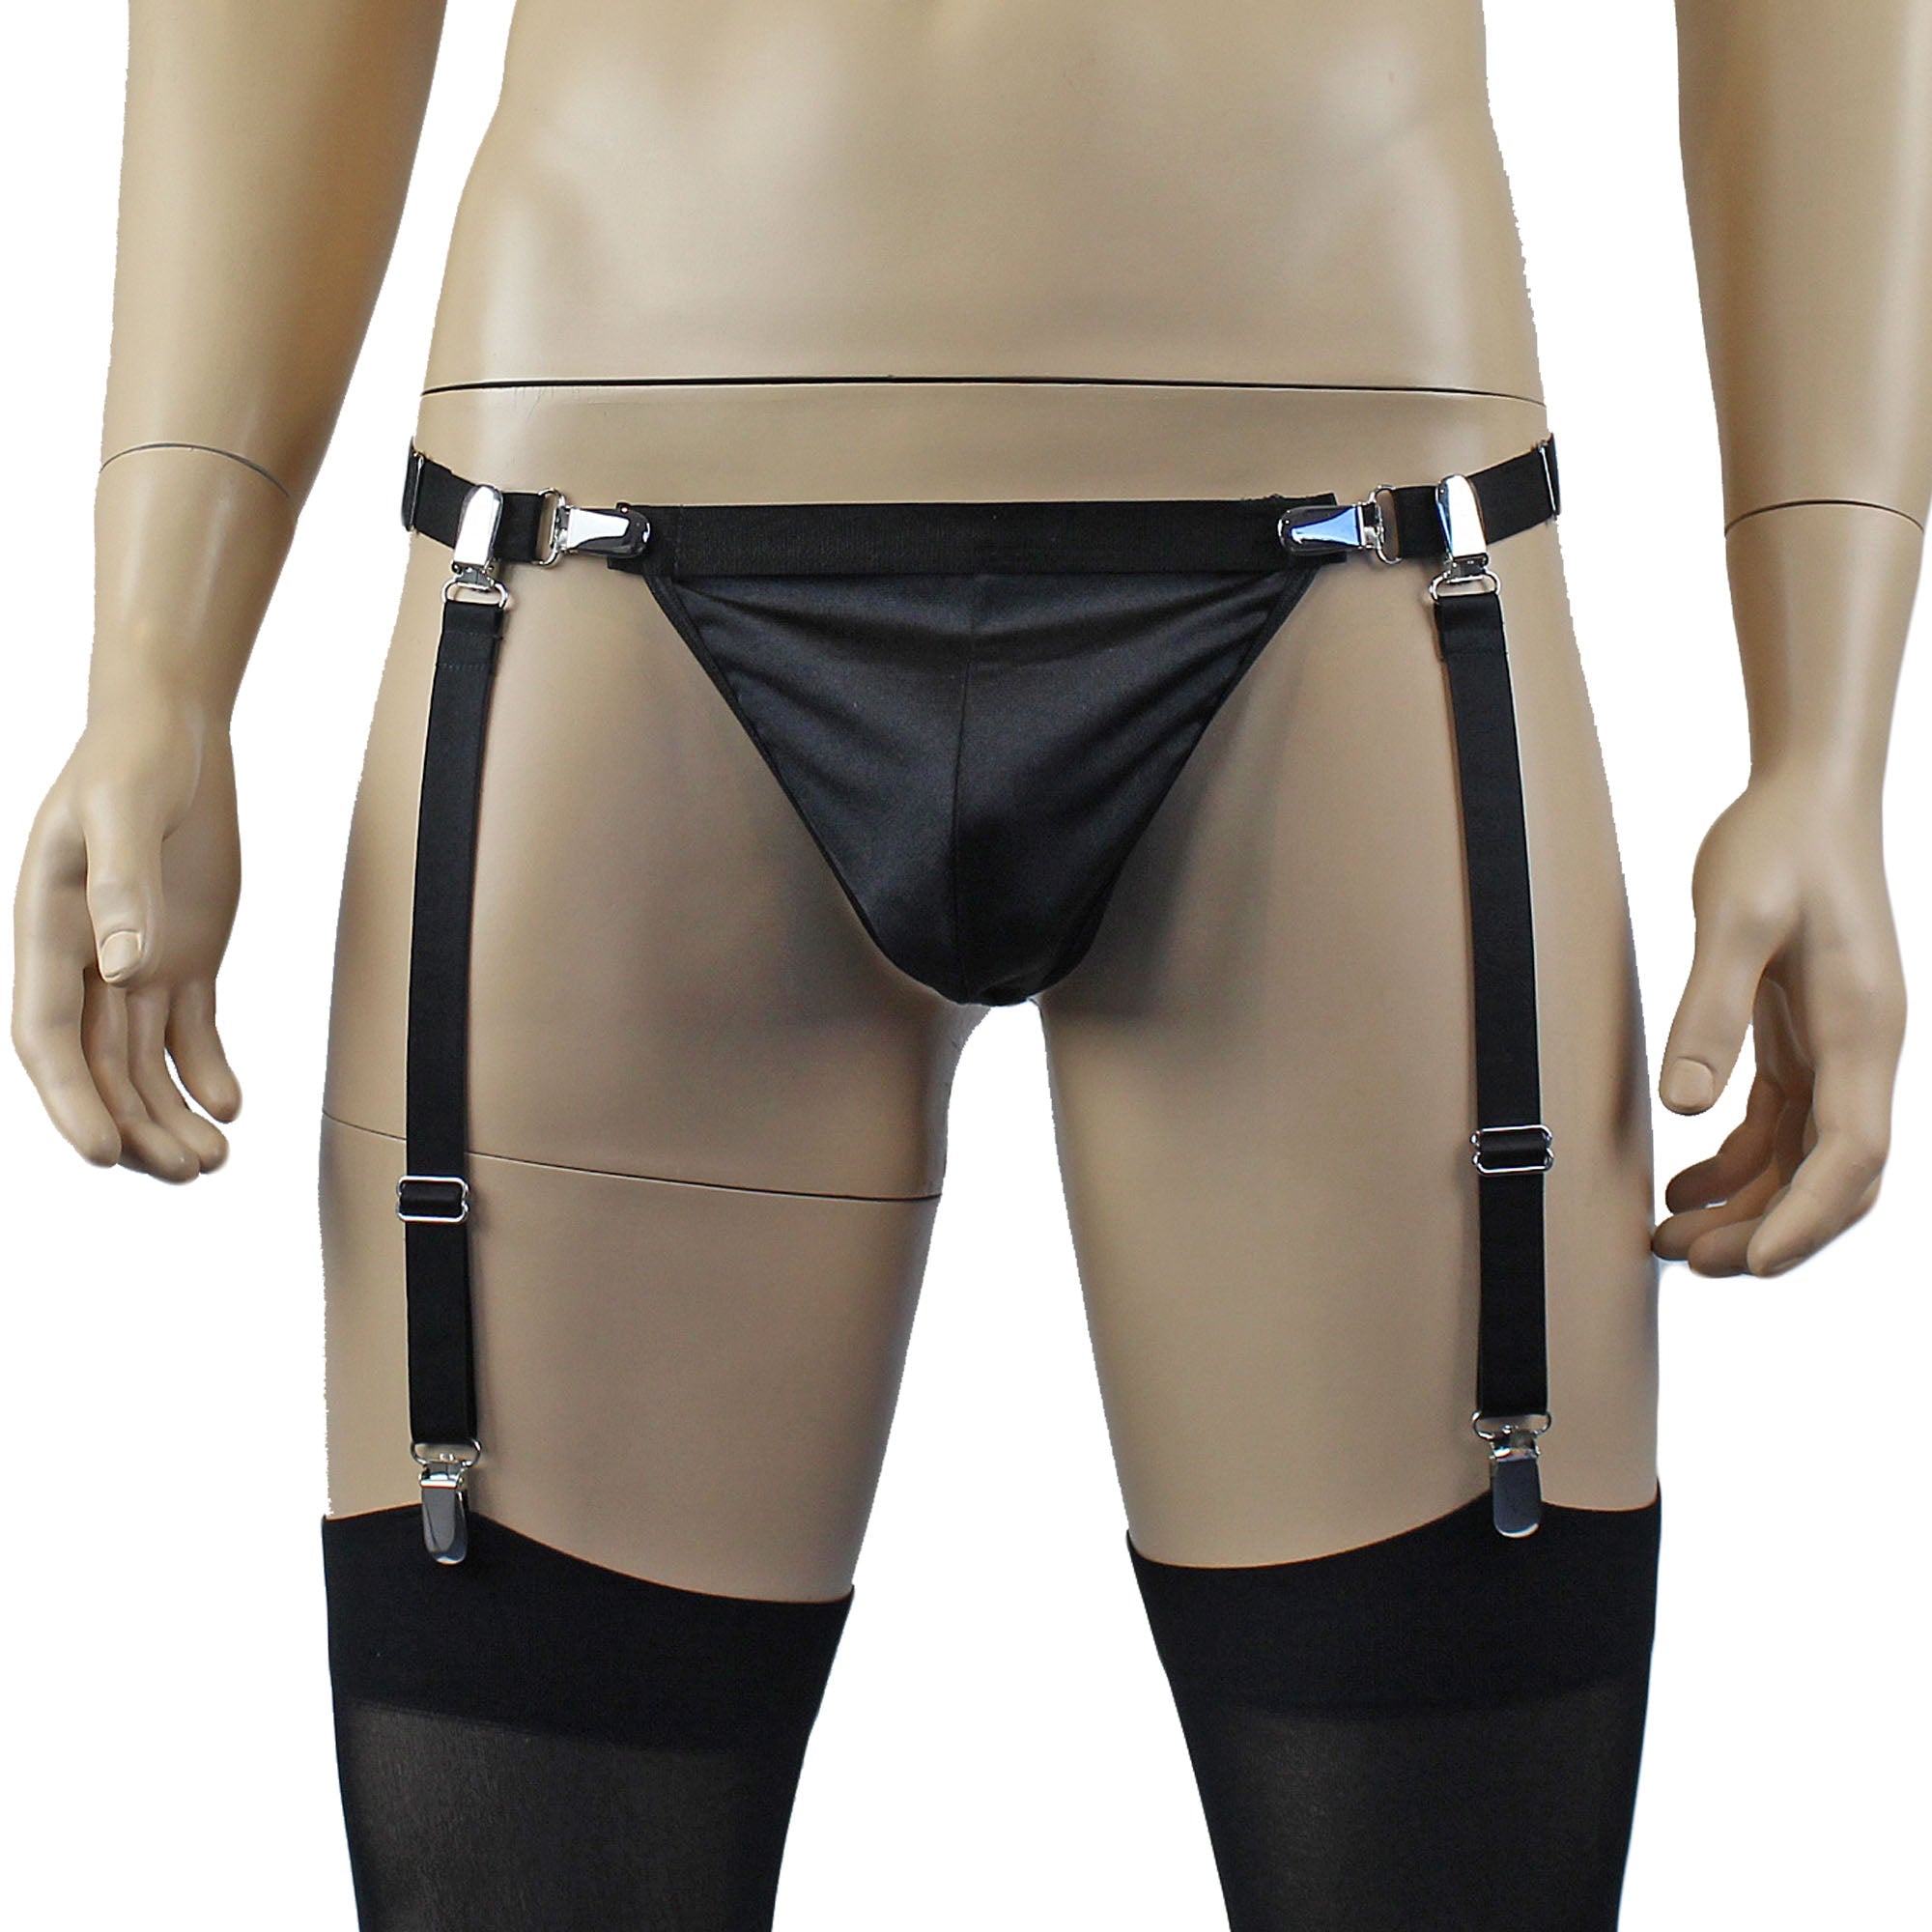 Mens Janice Thong with Adjustable Silver Clip Sides, Detachable Garters & Stockings Black